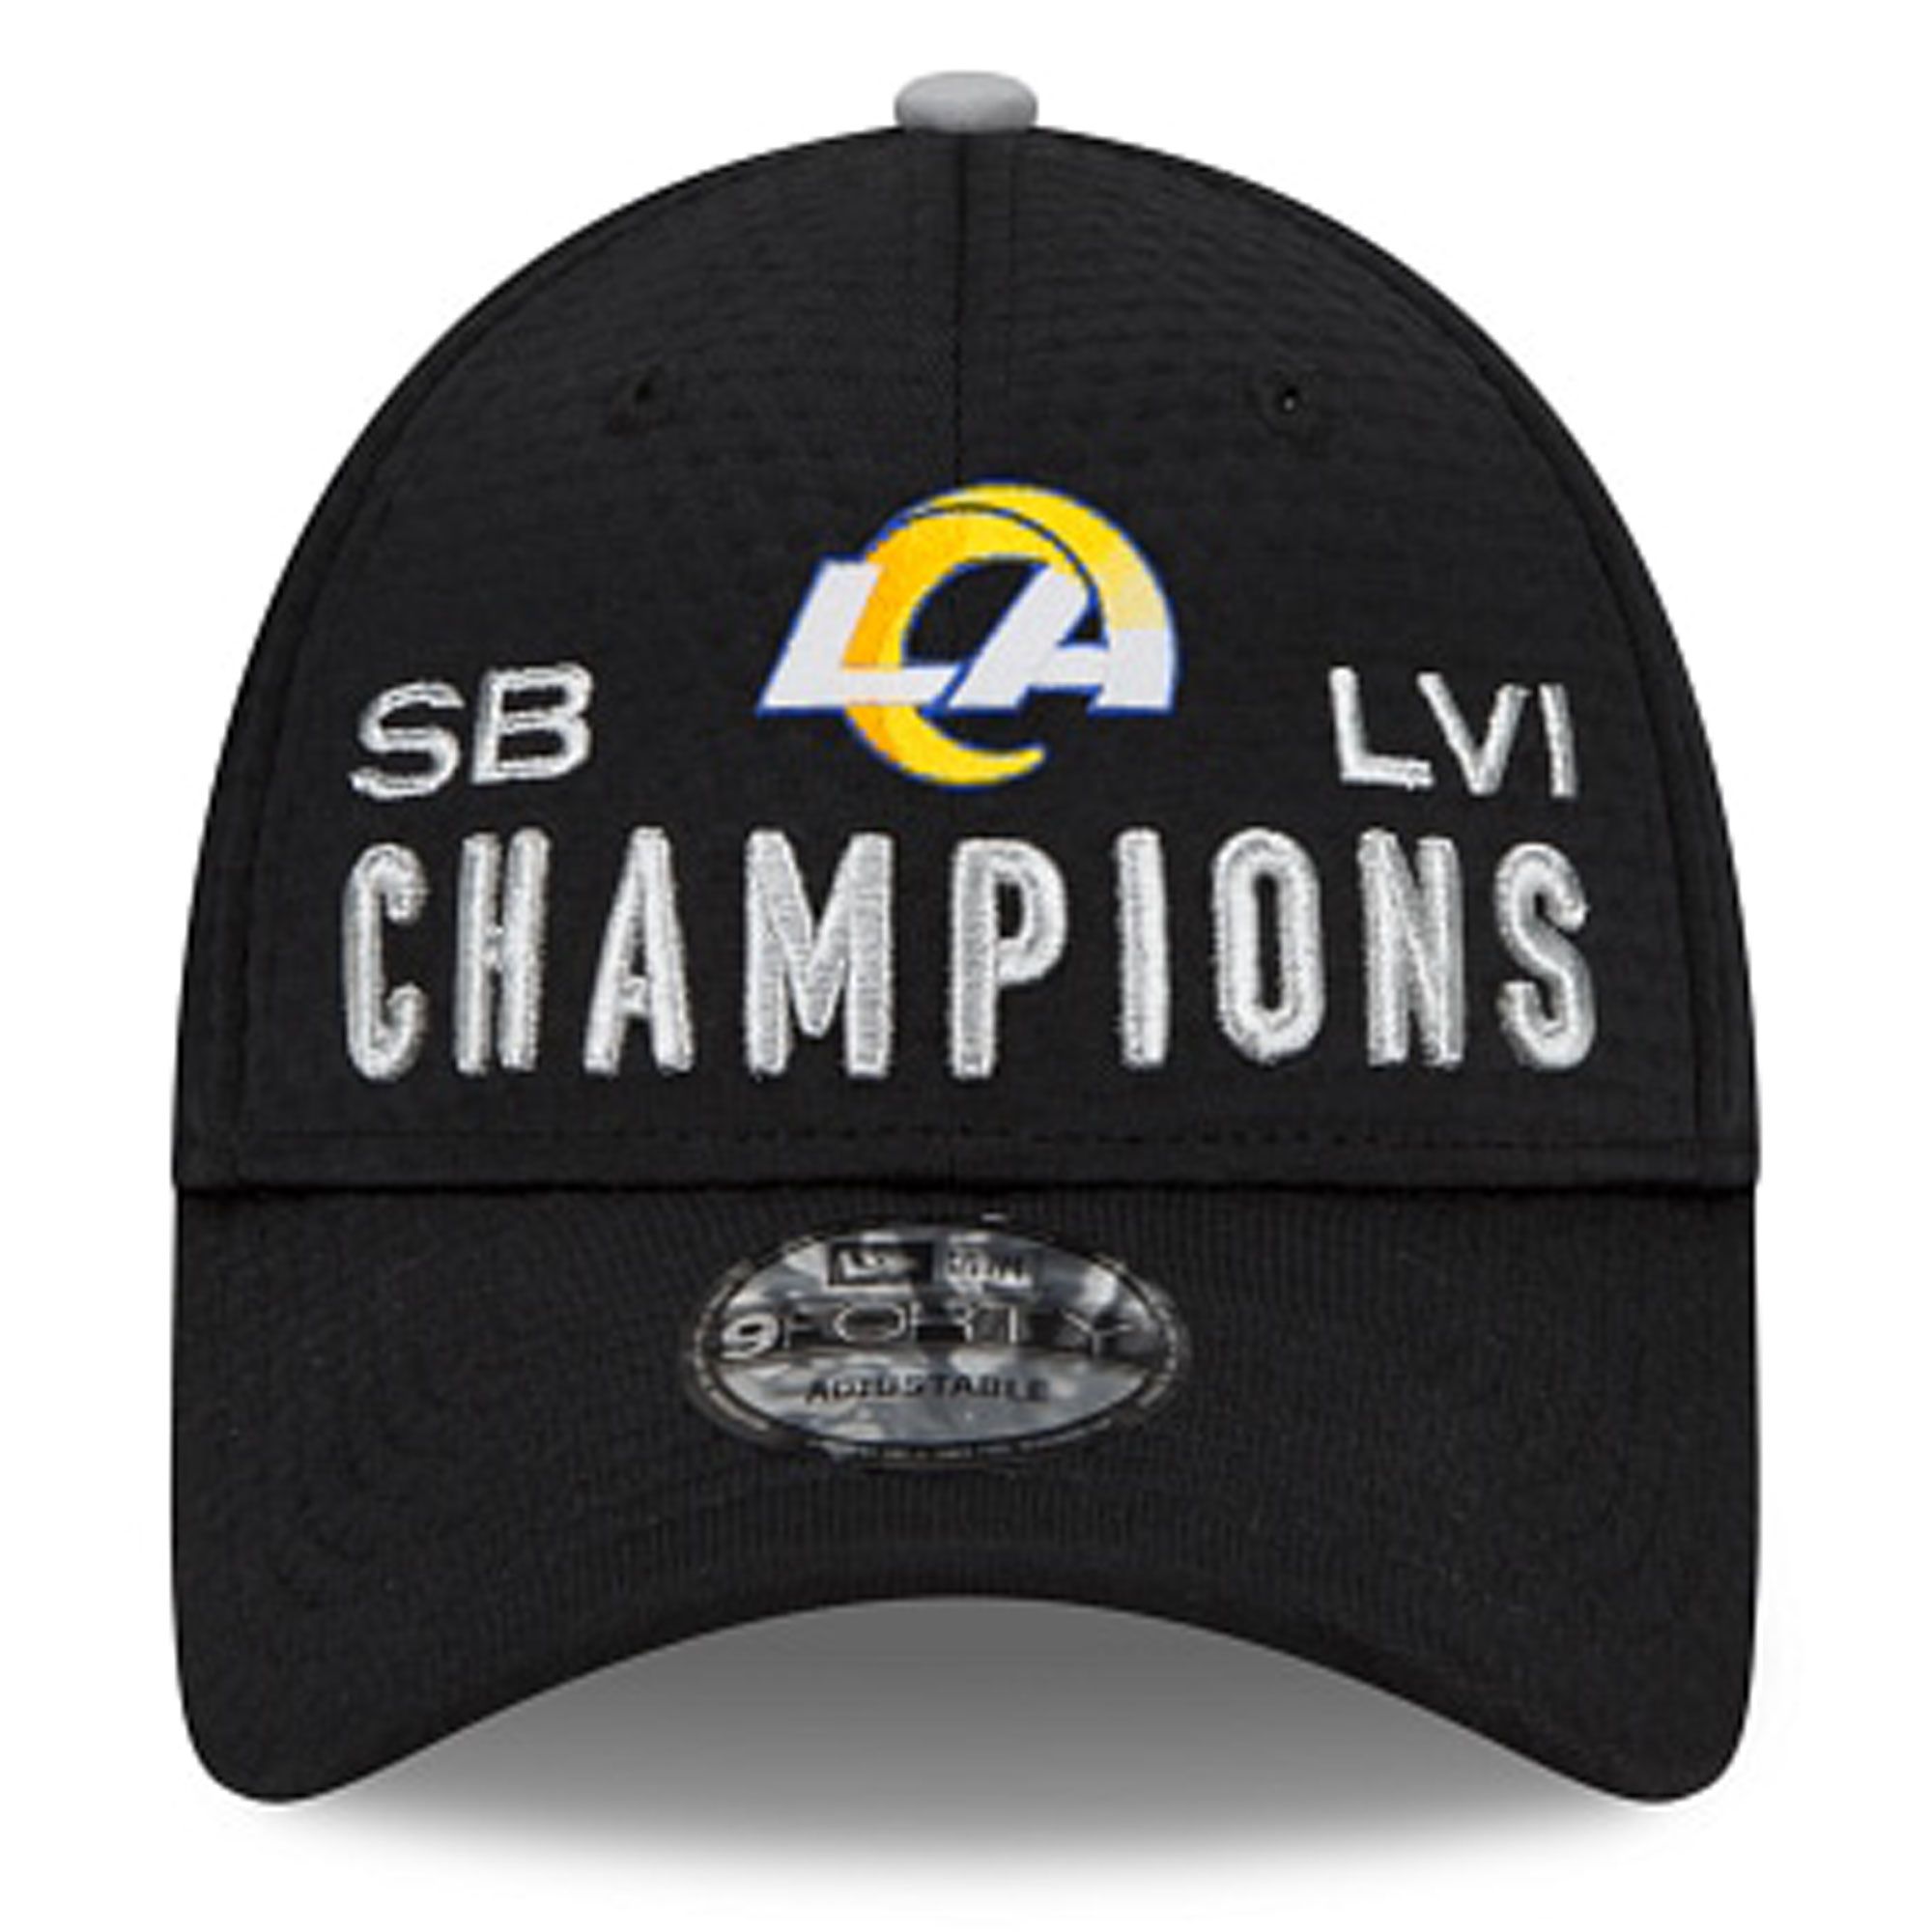 Los Angeles Rams Super Bowl Champions shirts, hats, jerseys, accessories:  Where to get merchandise 